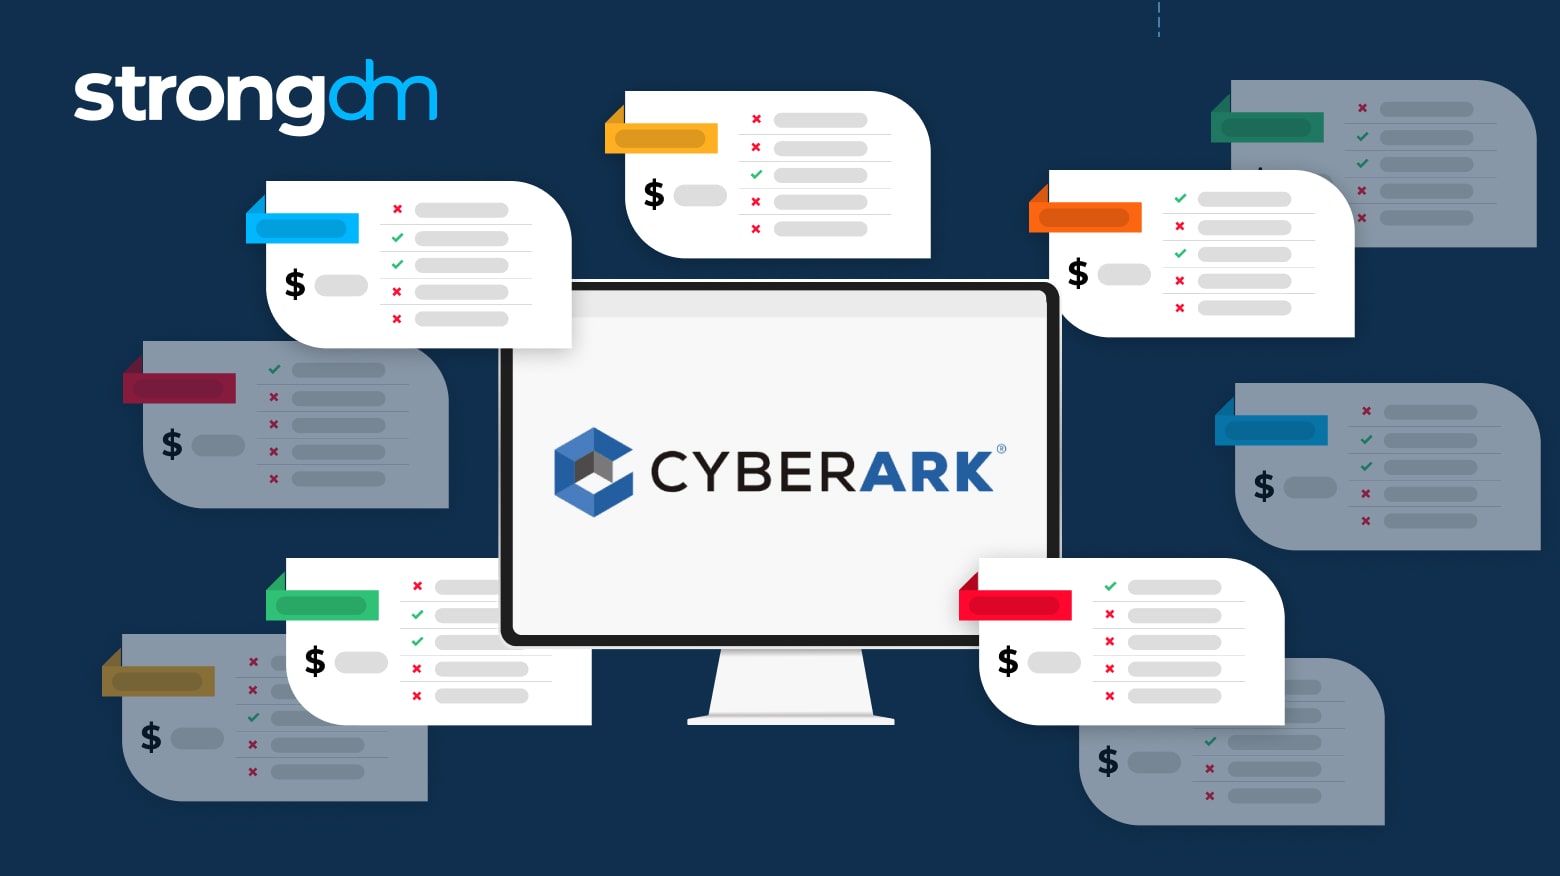 CyberArk Pricing: How Much Does It Cost and Is It Worth It?